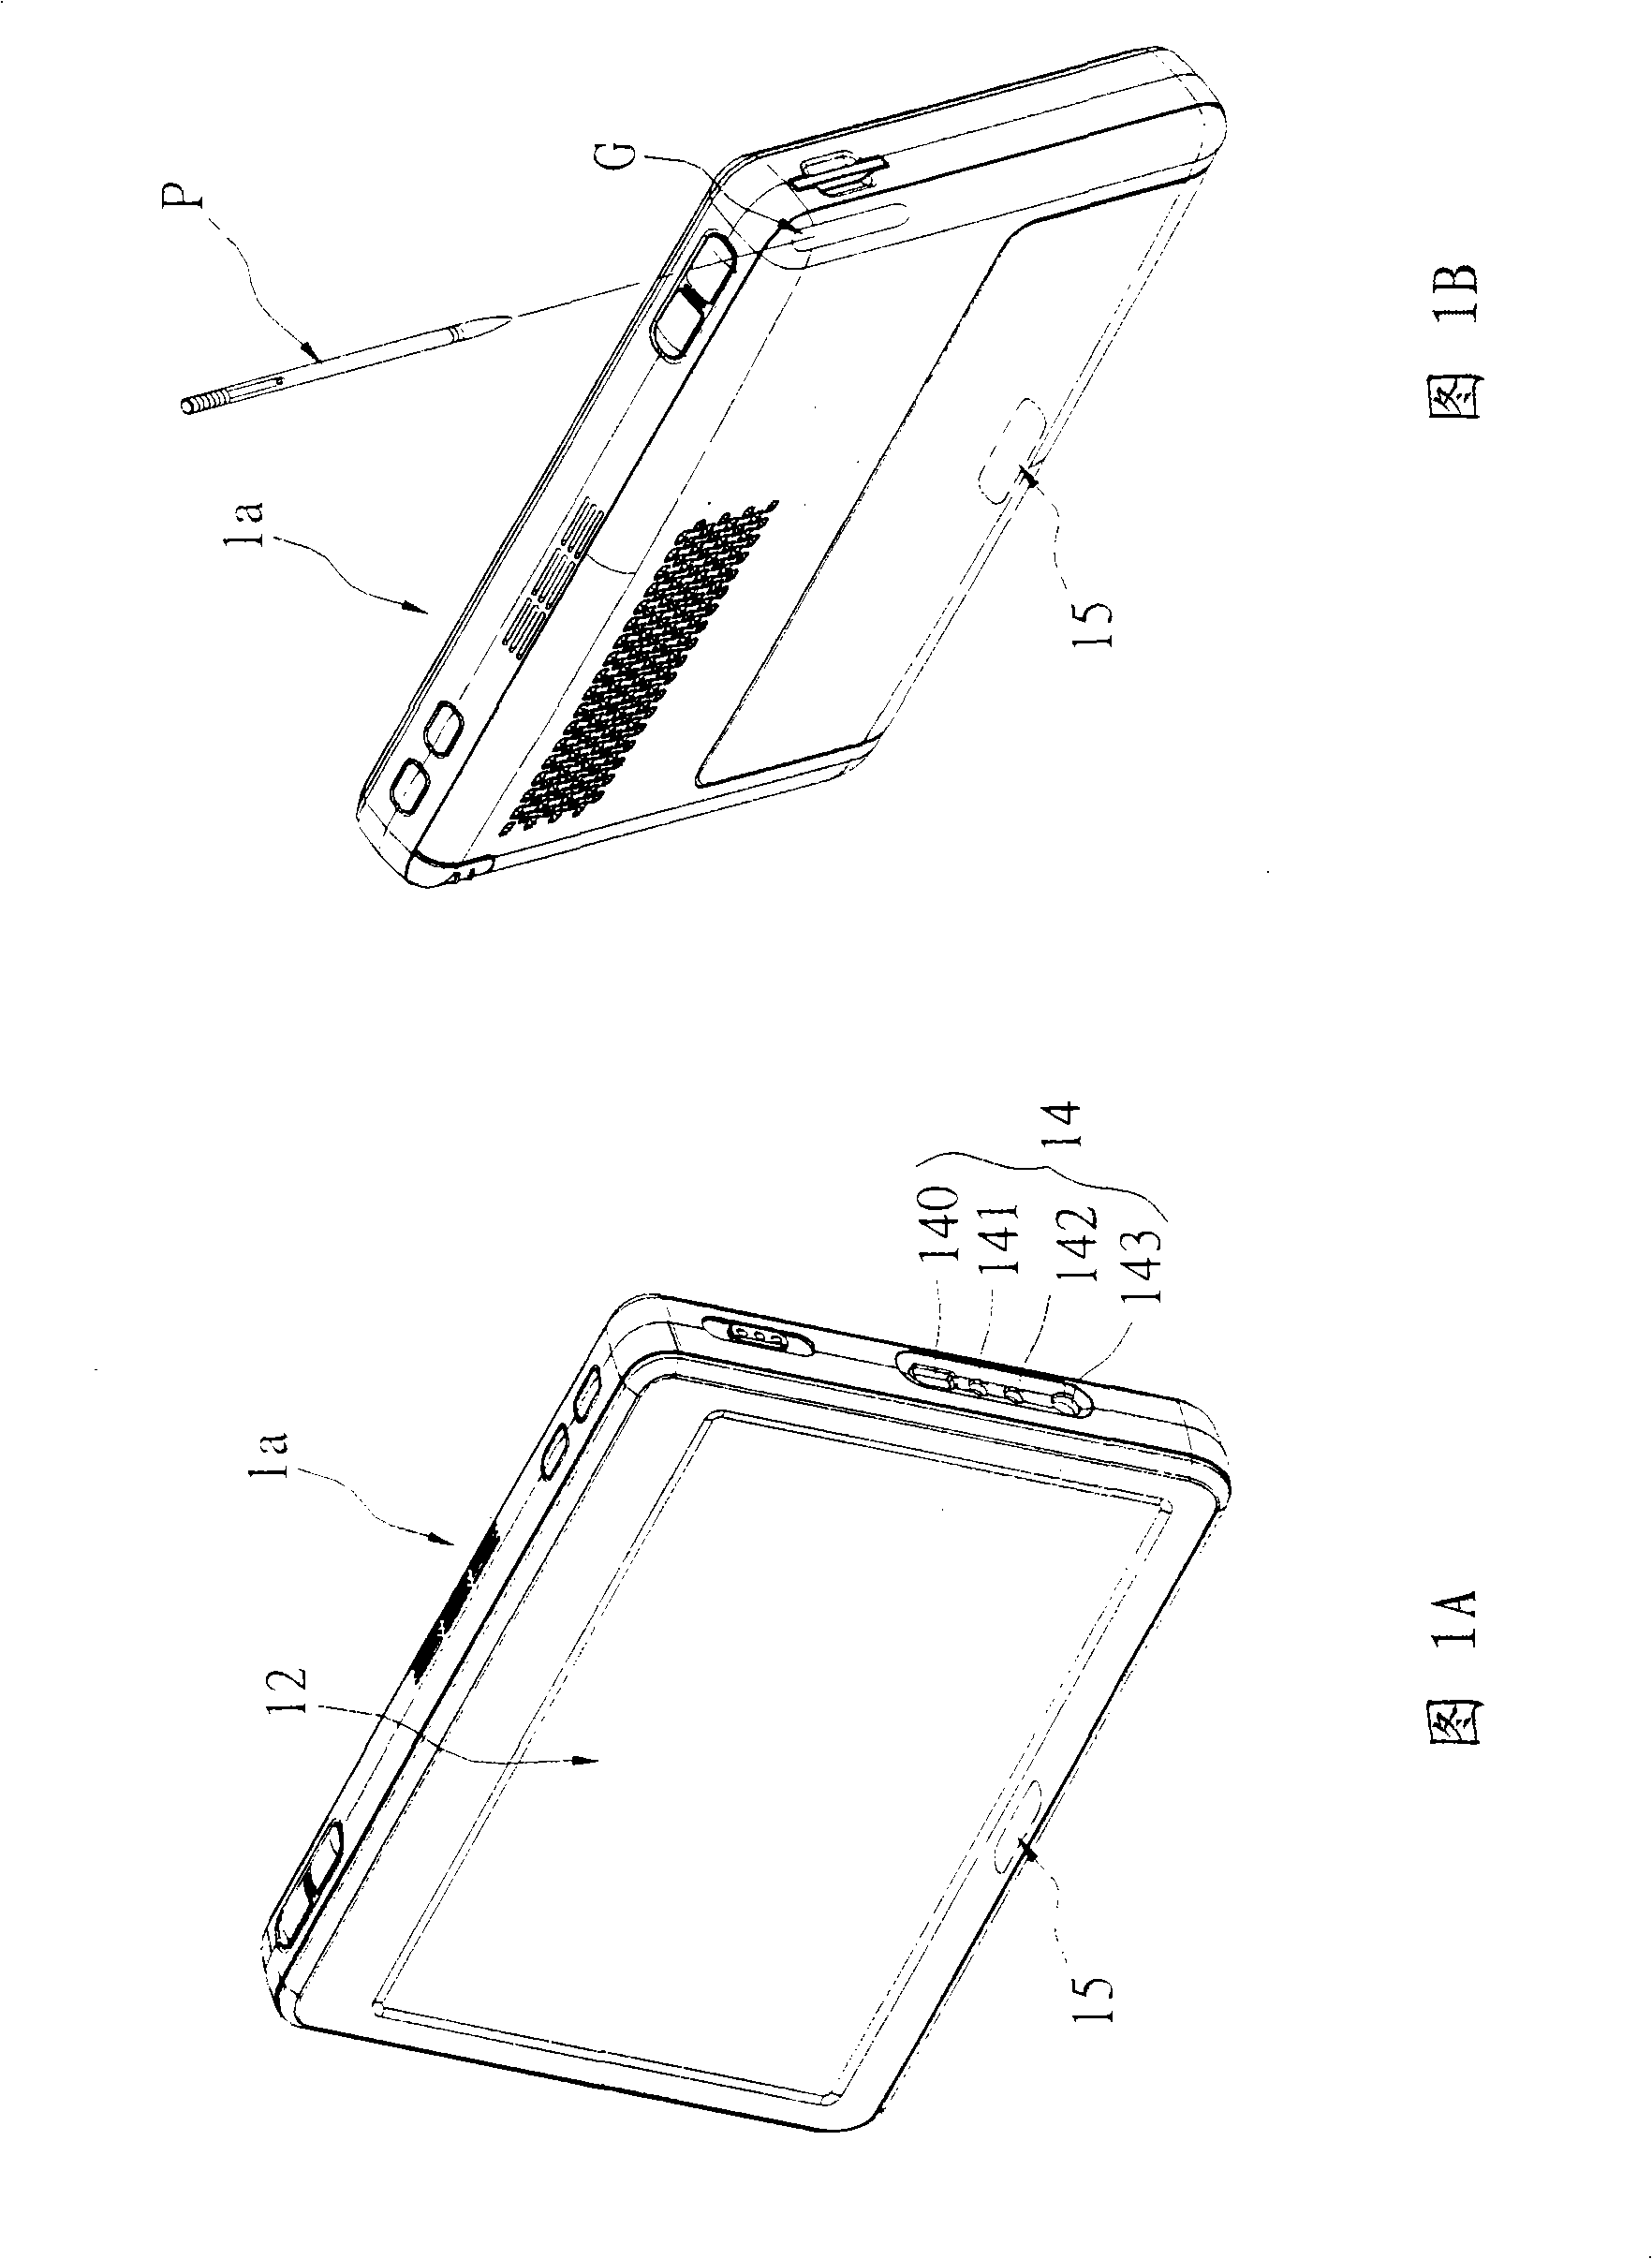 Portable computer system with extensible use function